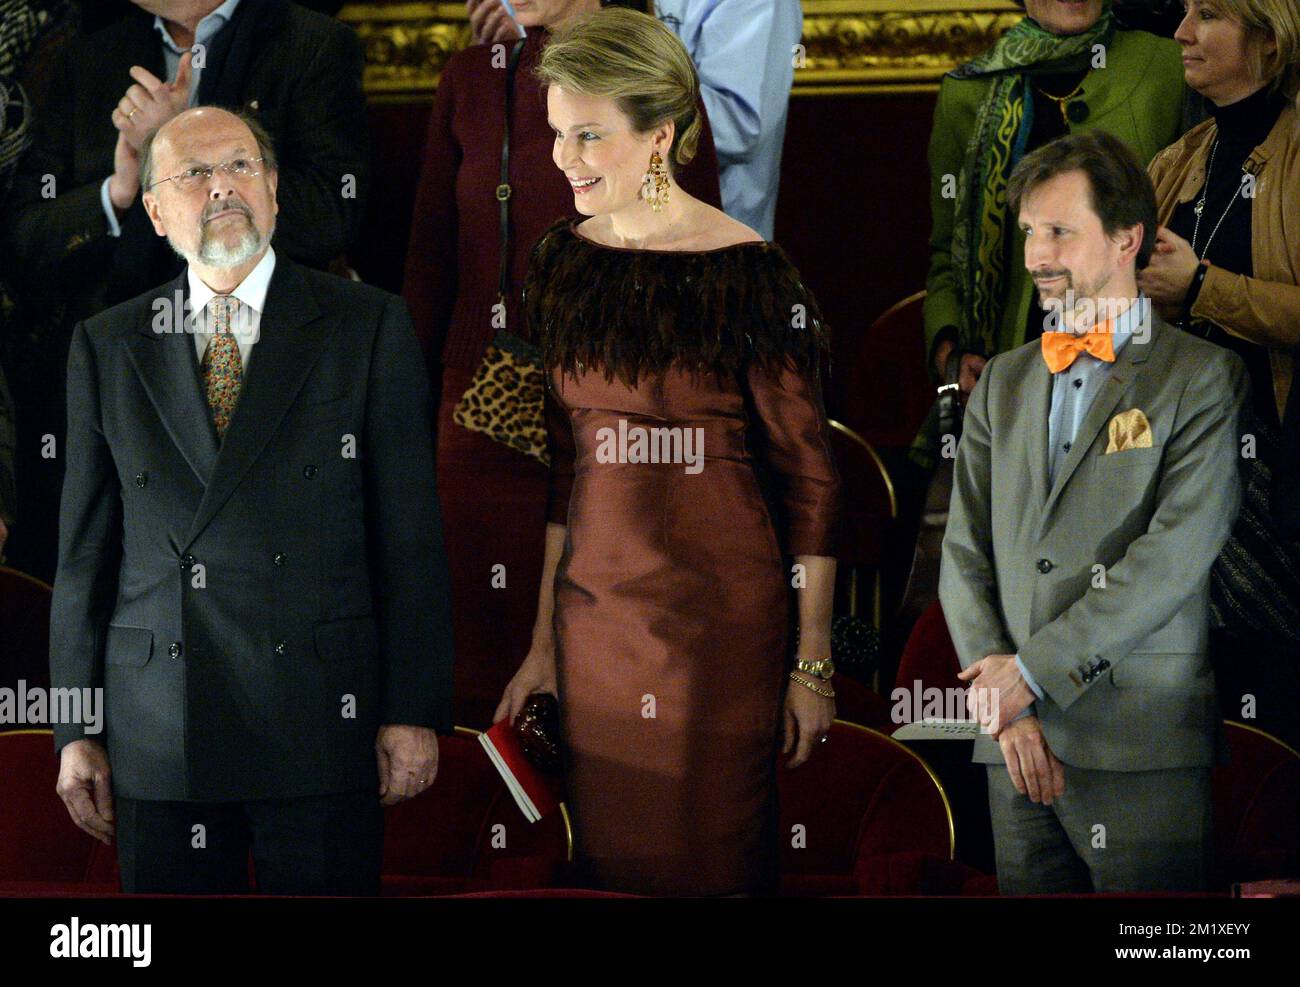 20150203 - BRUSSELS, BELGIUM: Luc Coene, Queen Mathilde of Belgium and Peter De Caluwe pictured during a performance of 'Alcina' of George Frideric Handel, in a production of Belgian opera house De Munt-La Monnaie and Dutch 'De Nationale Opera', in Brussels, Tuesday 03 February 2015. BELGA PHOTO ERIC LALMAND Stock Photo